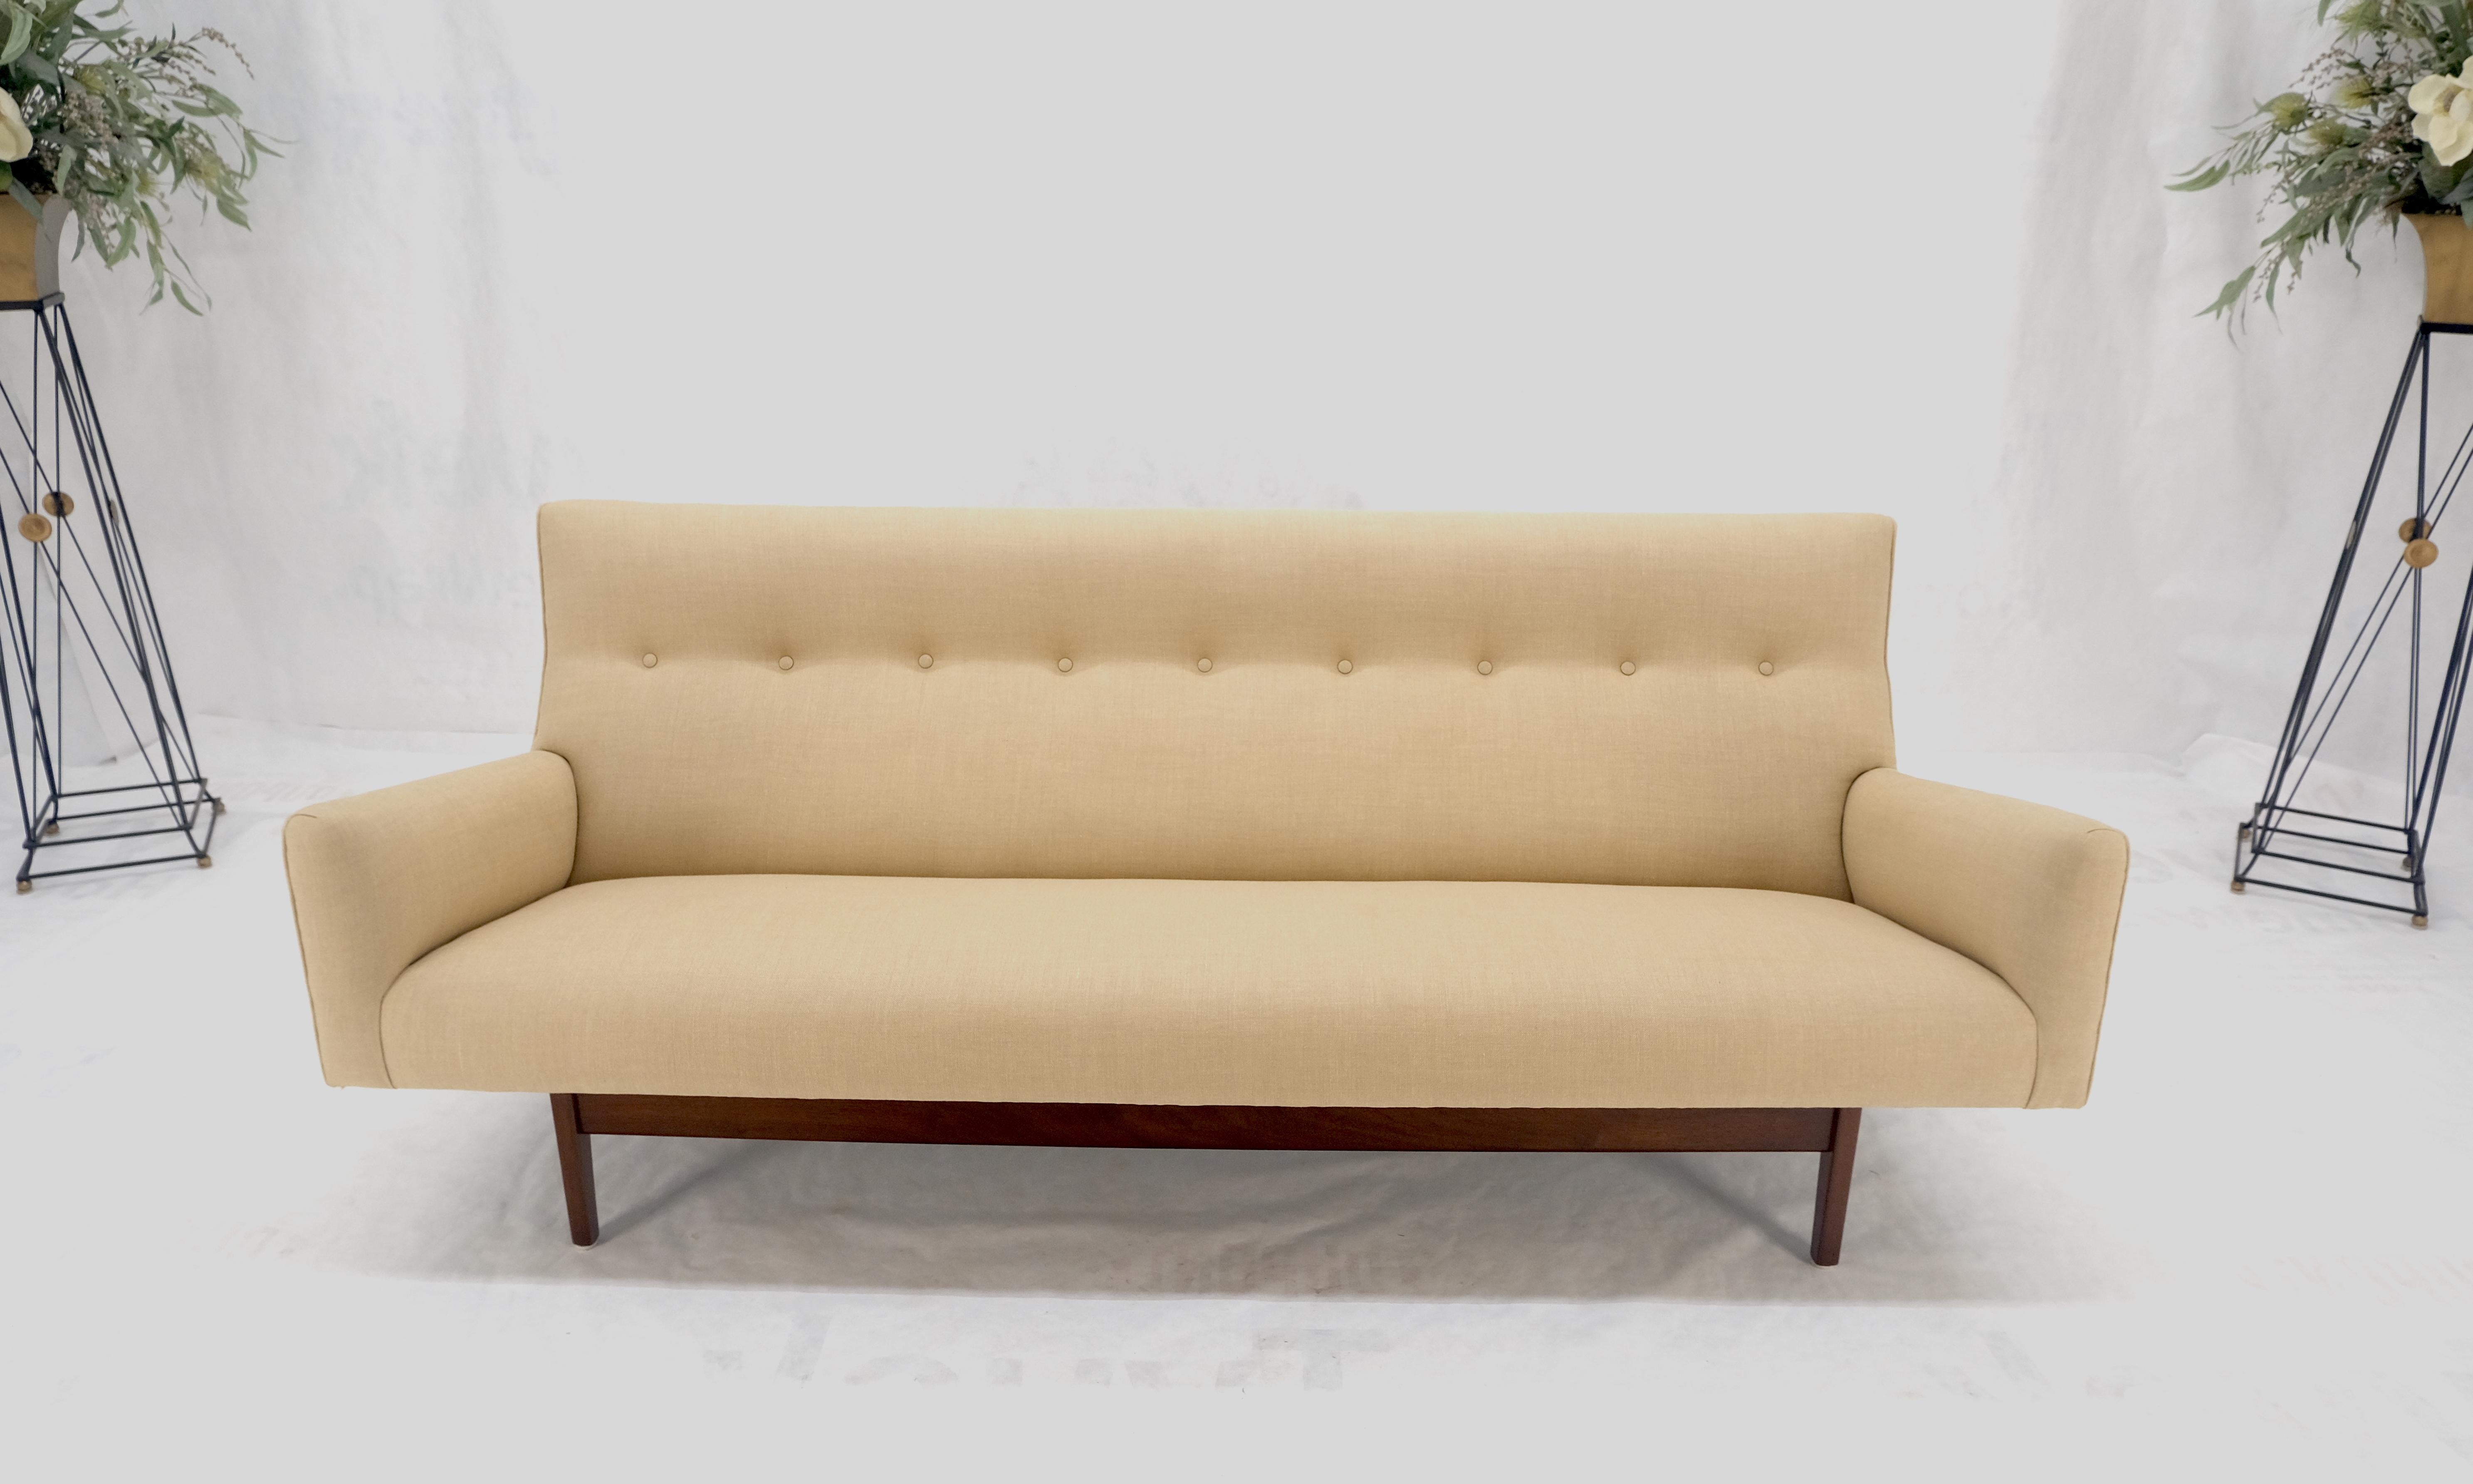 20th Century Jens Risom NEW Beige Linen Upholstery Oiled Walnut Frame c1960s Sofa Couch MINT! For Sale